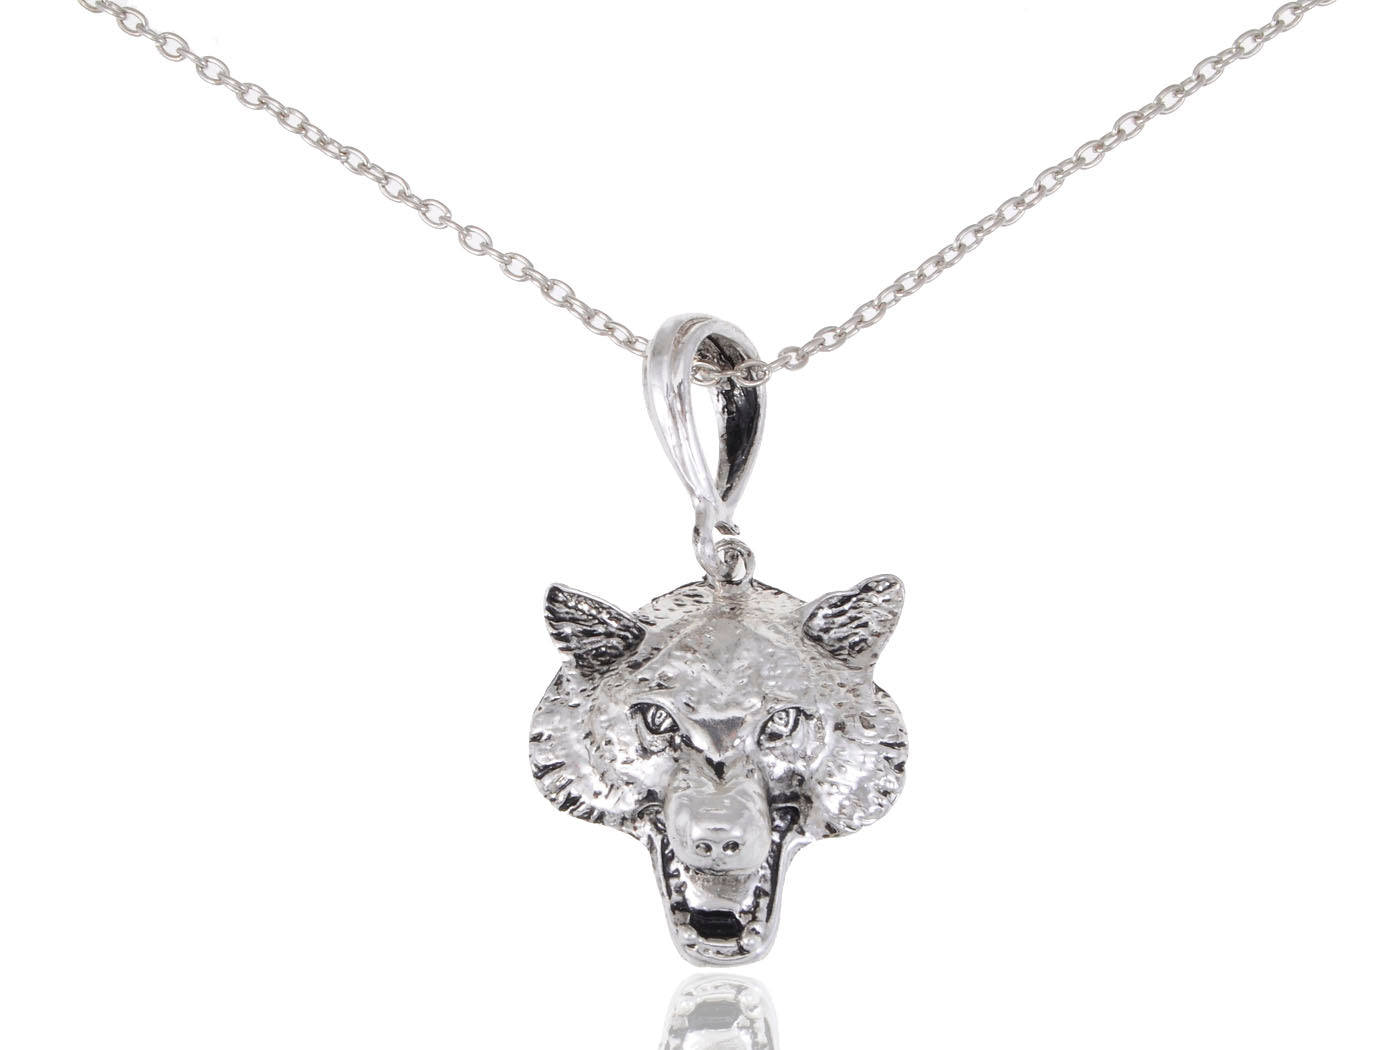 Hypnotic Fox Faced Lucky Charm Pendant Necklace